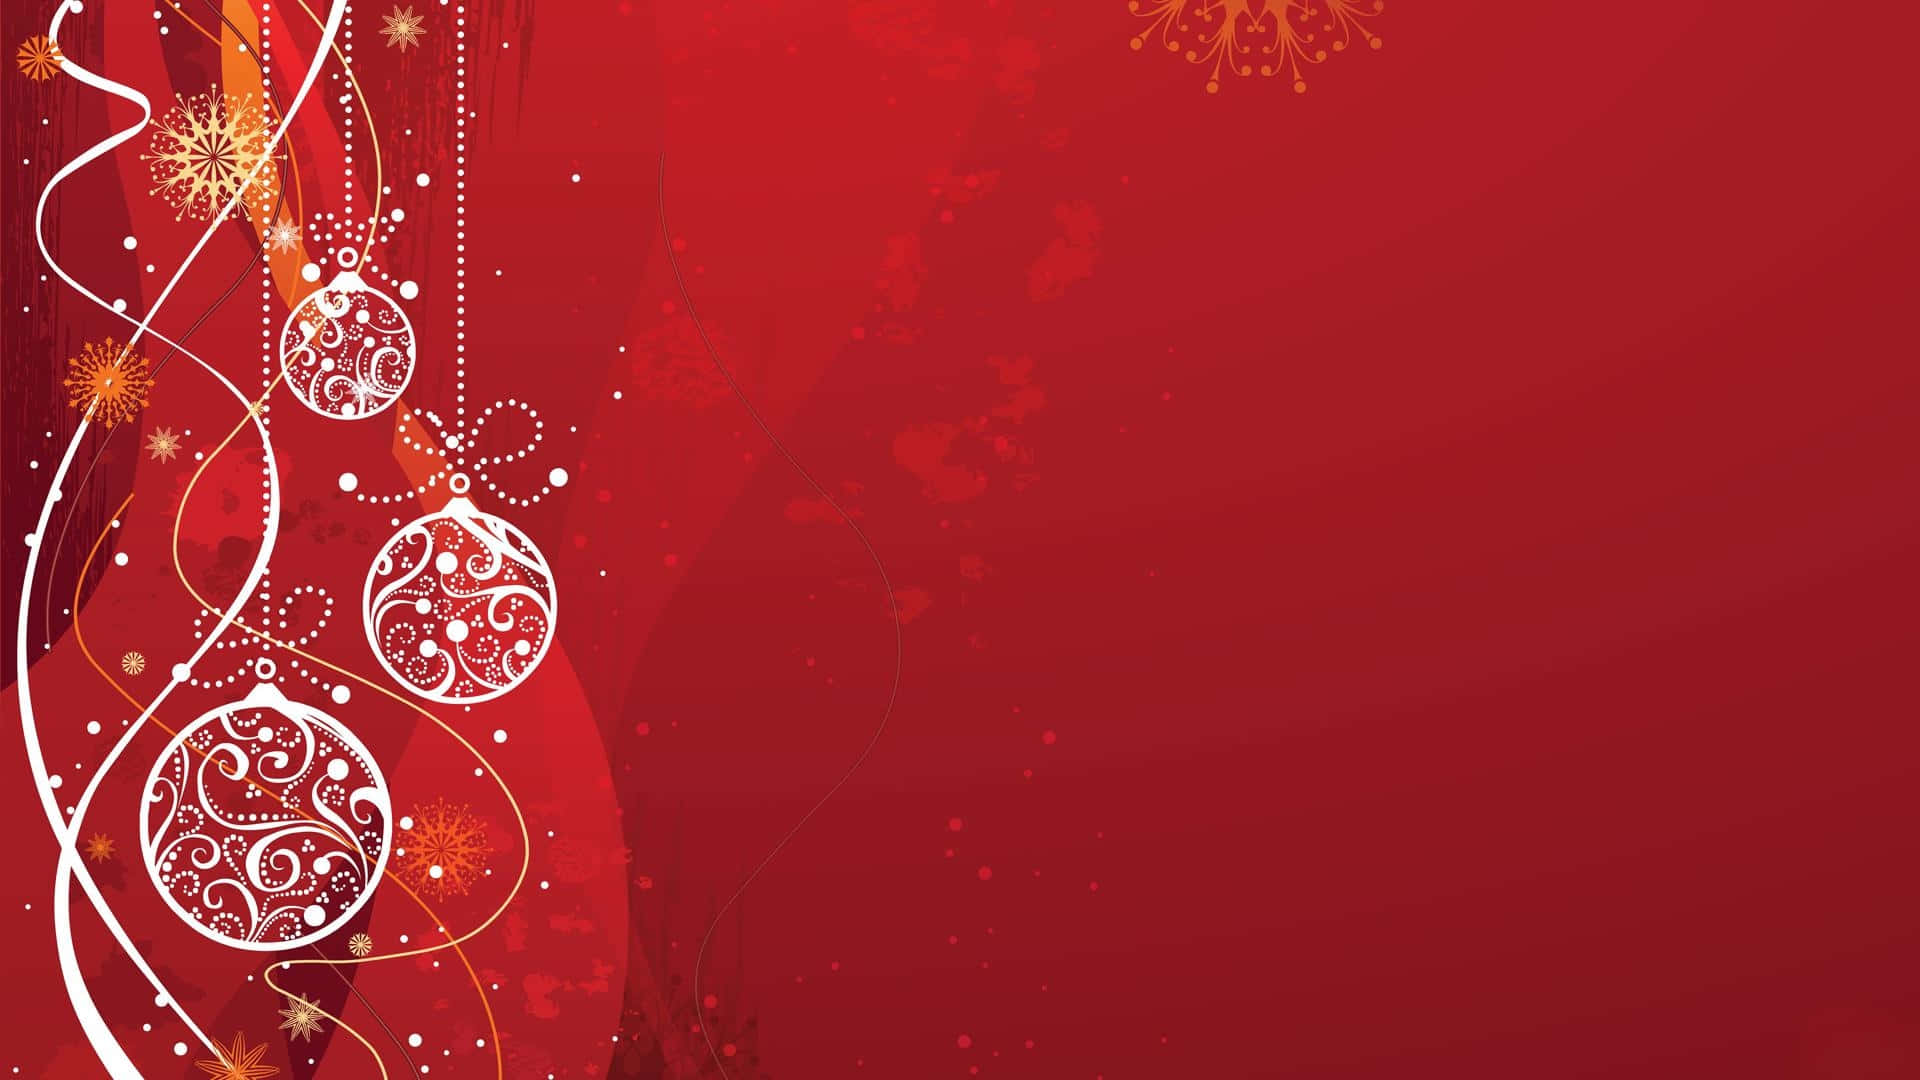 Celebrate the Holiday Season with a Vibrant Red Christmas Wallpaper